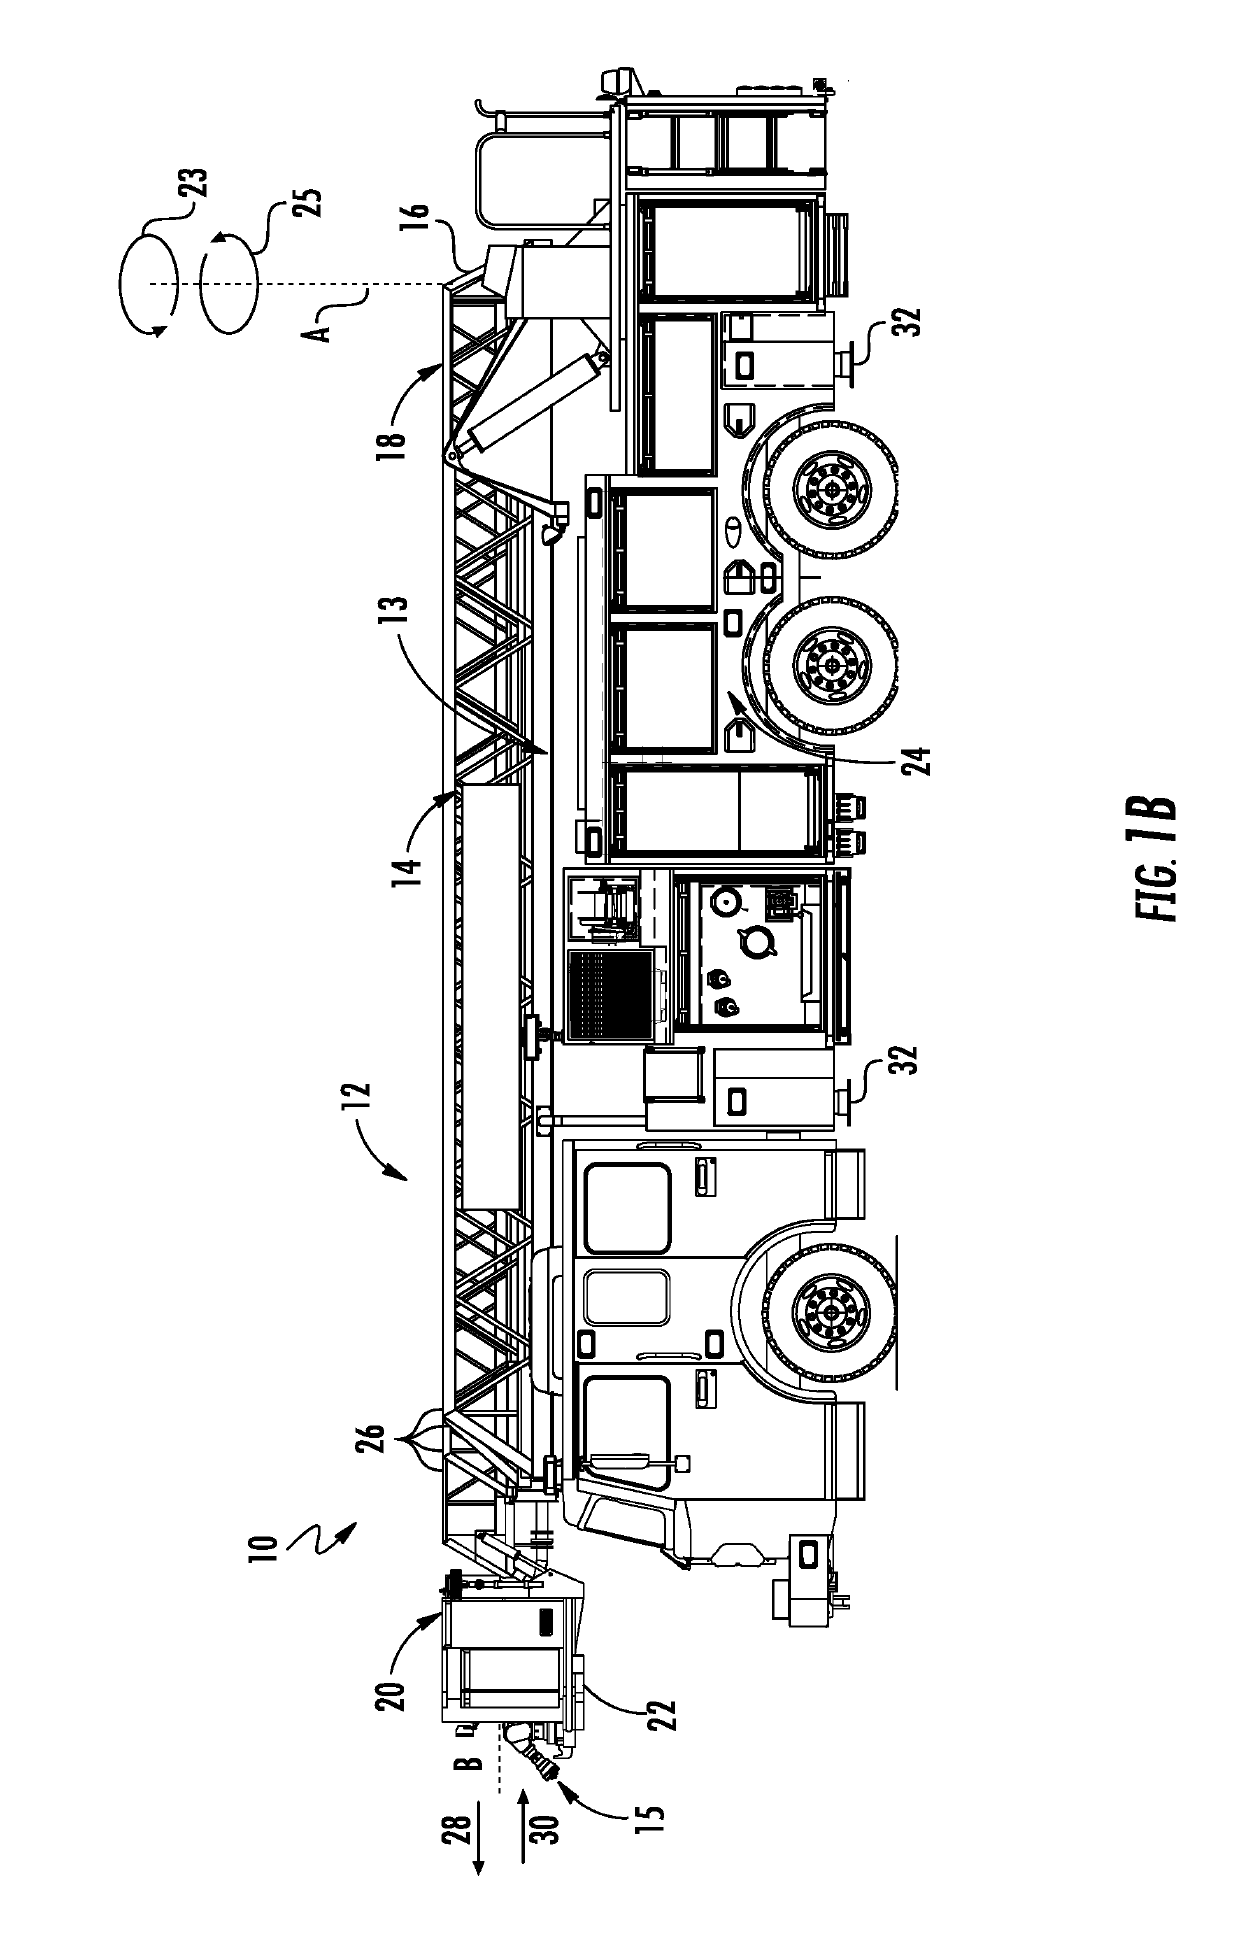 Multi-stance aerial device control and display